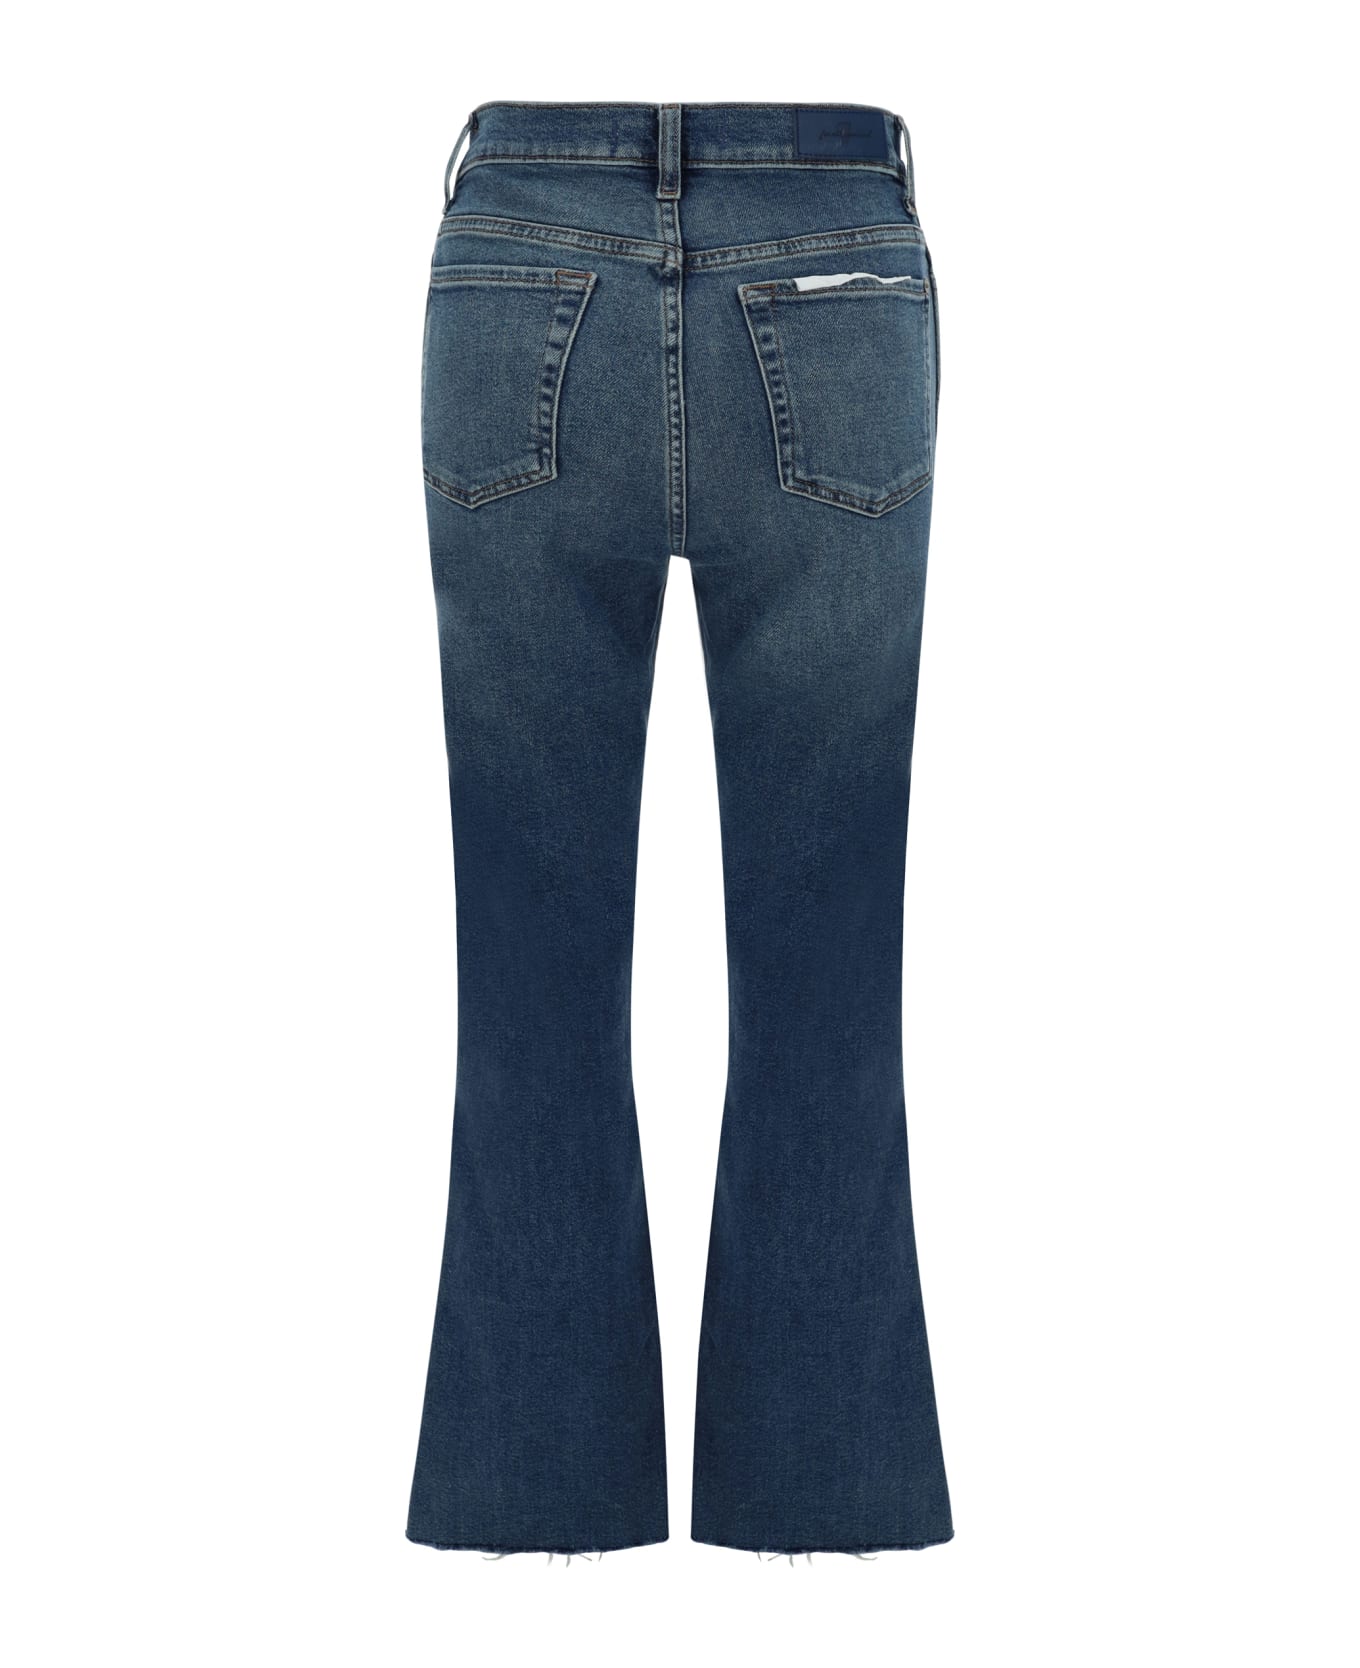 7 For All Mankind Kick Luxe Jeans - Dark Blue